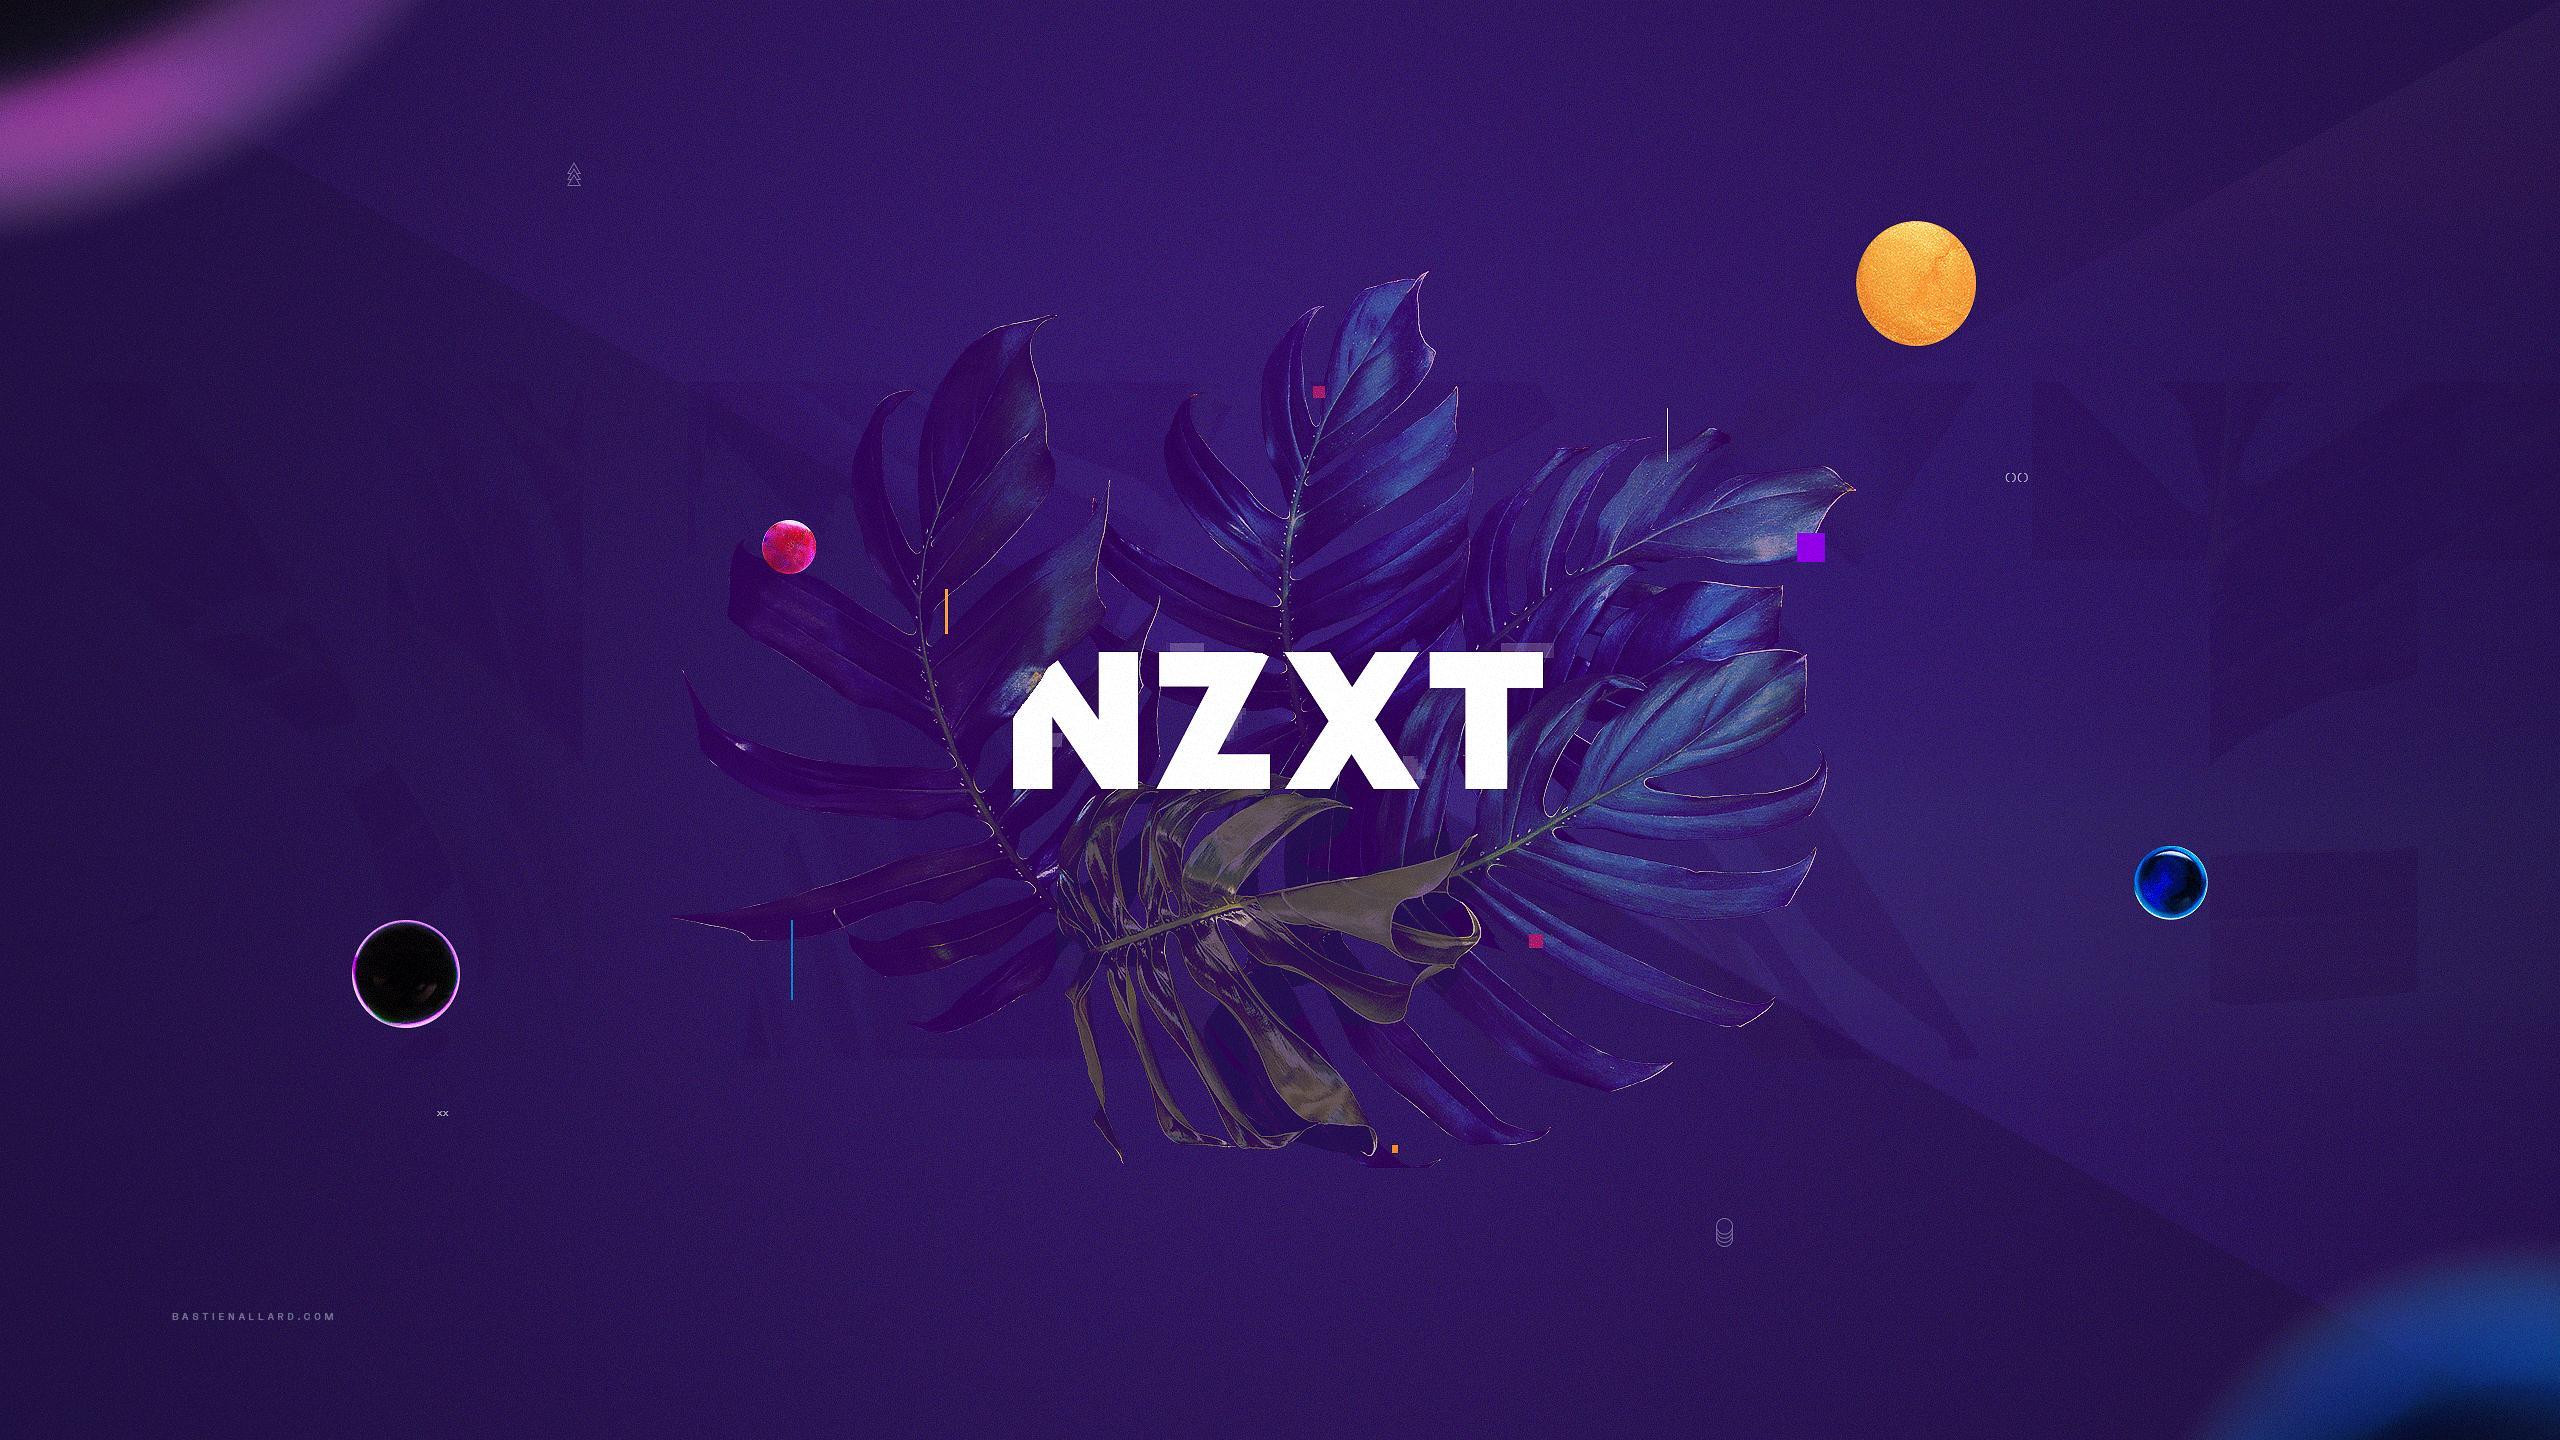 Saw people were making NZXT Wallpapers on Discord, here's my take